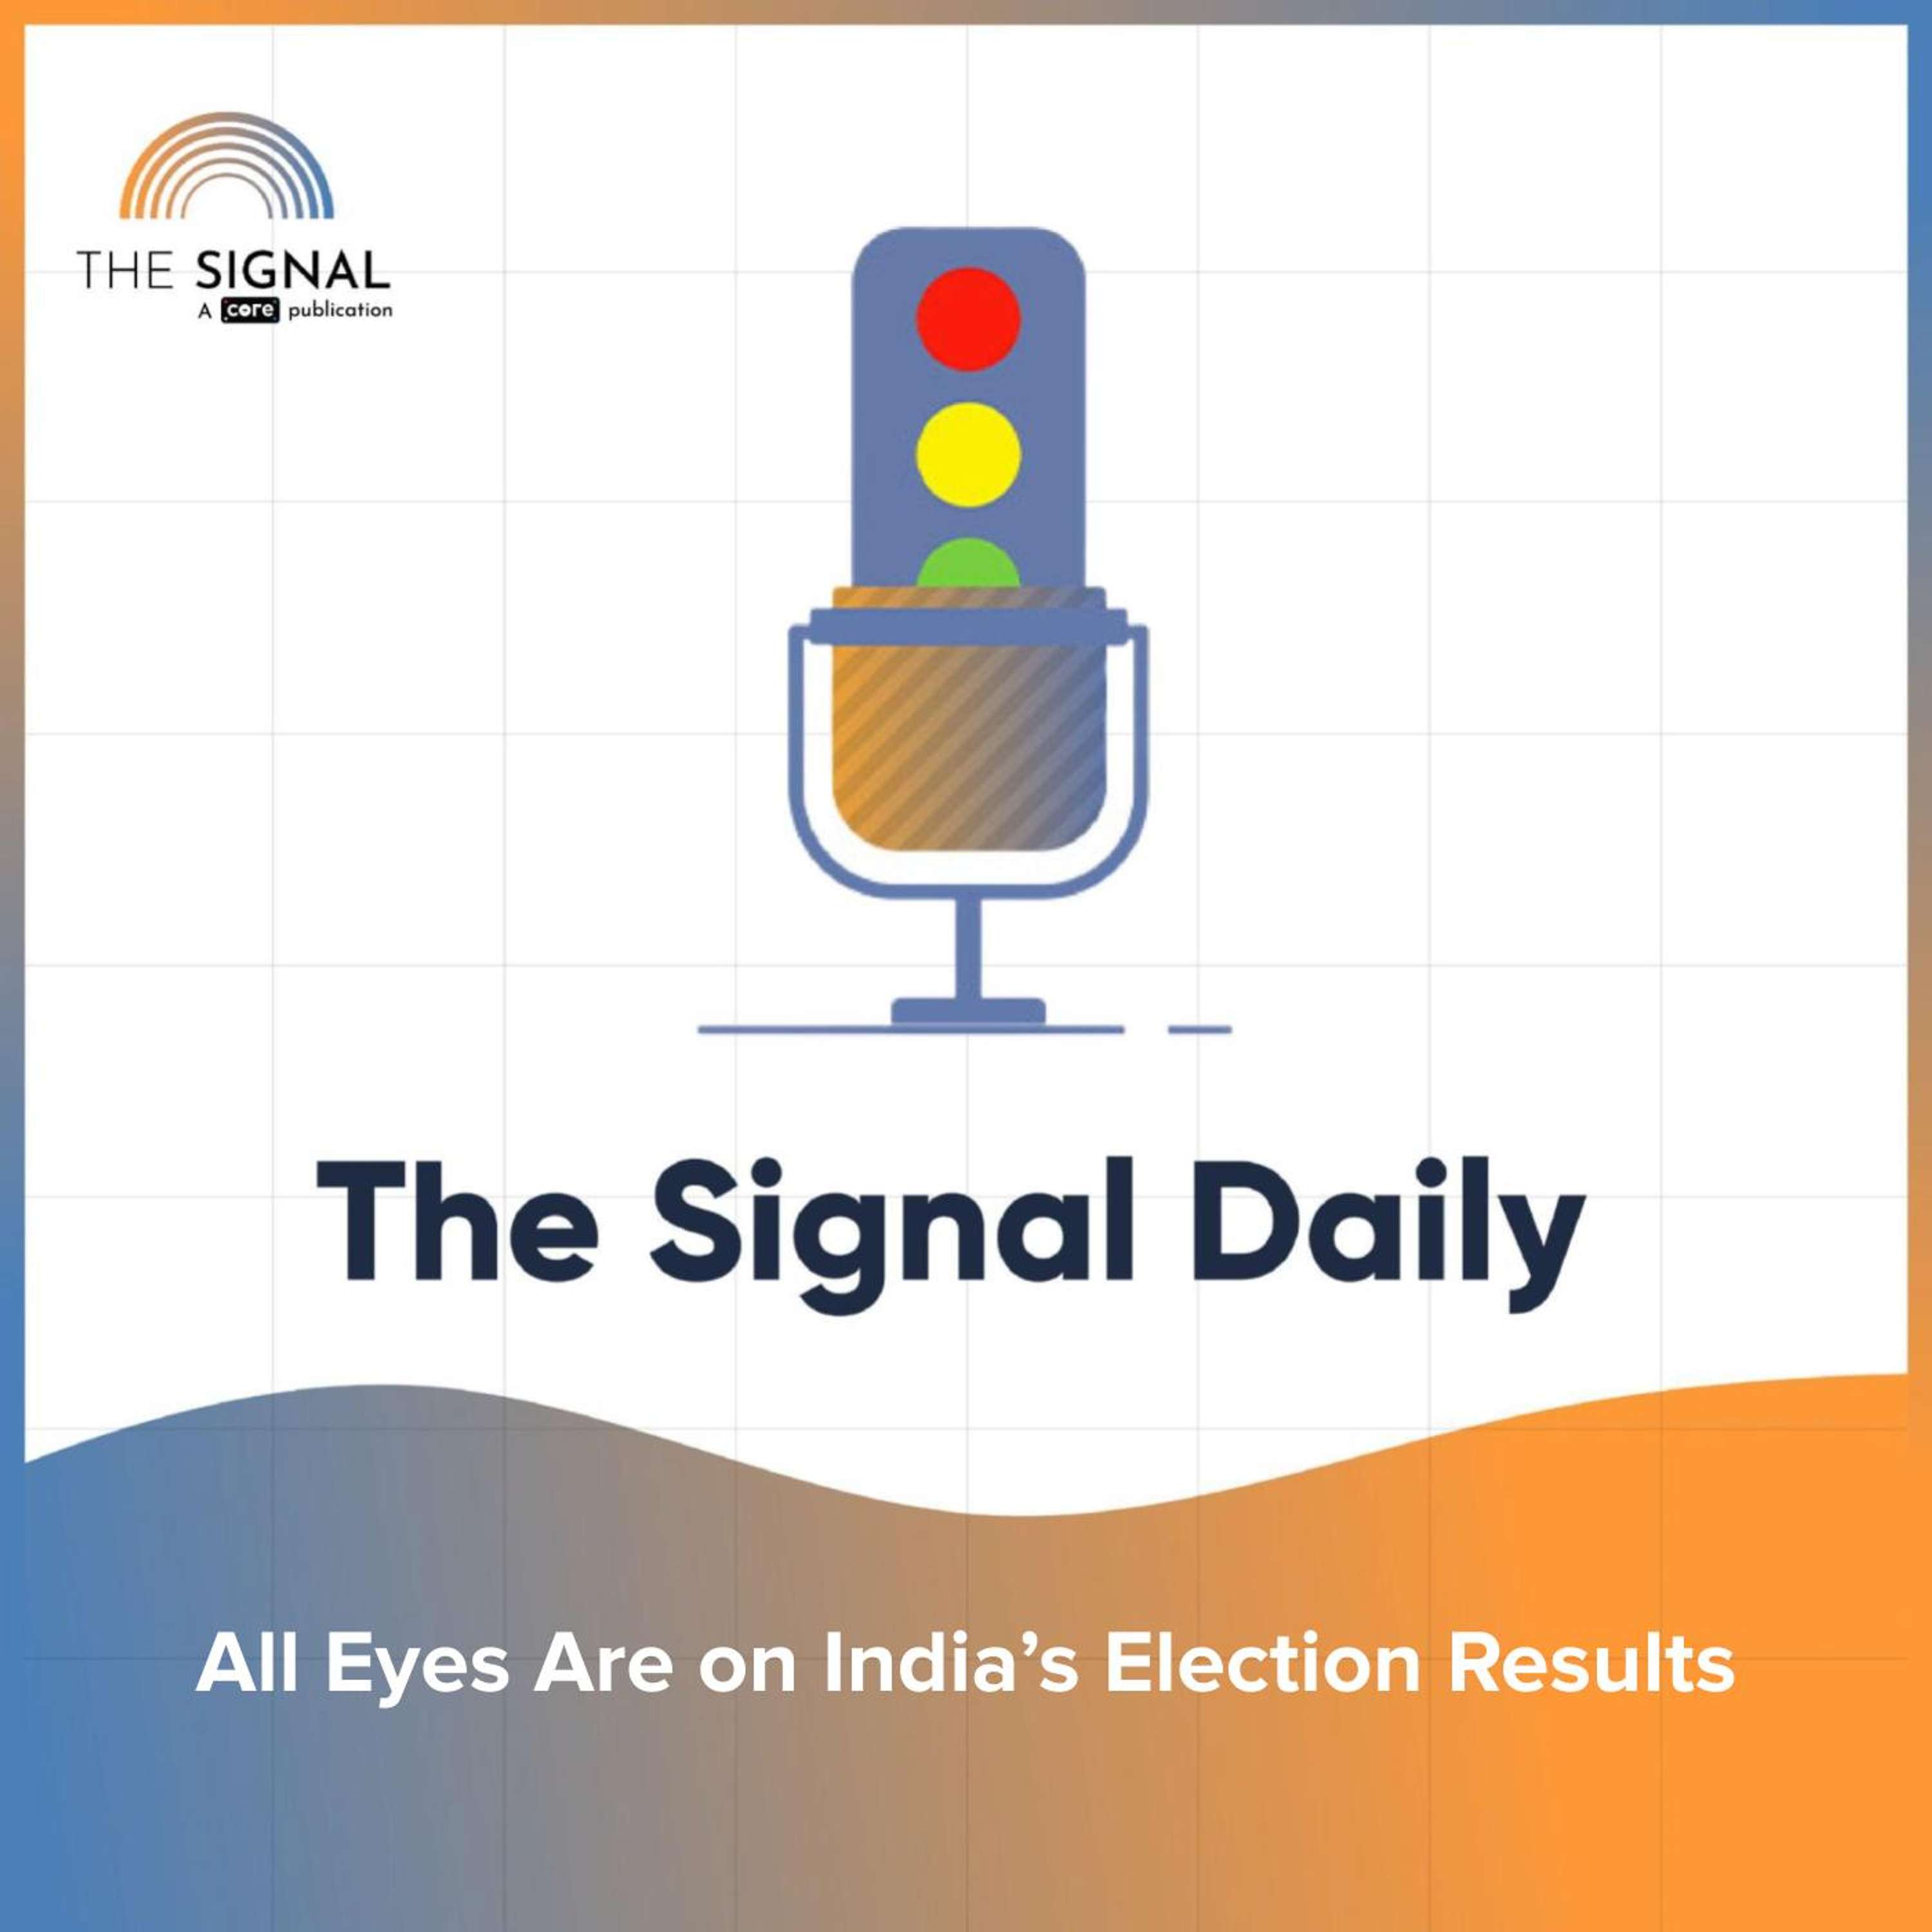 All Eyes Are on India’s Election Results